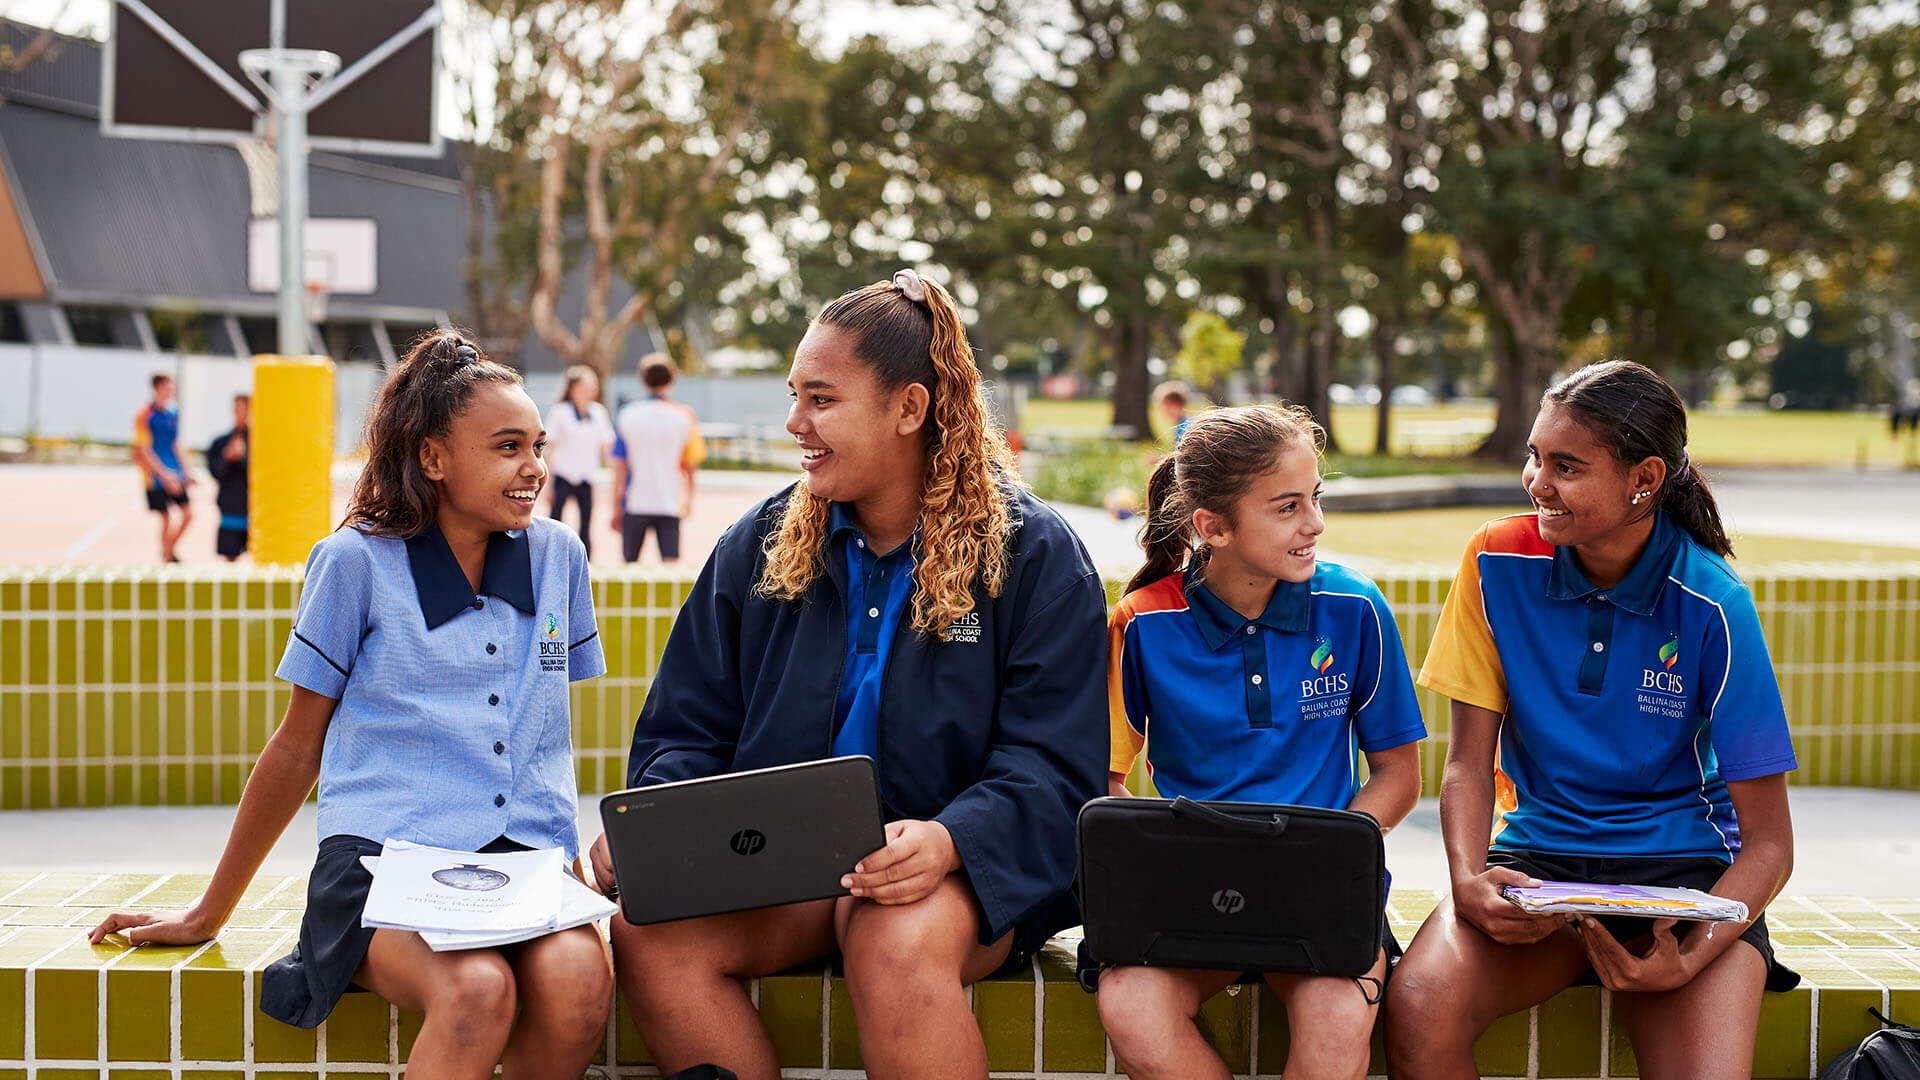 High school students sitting in playground talking and using computers